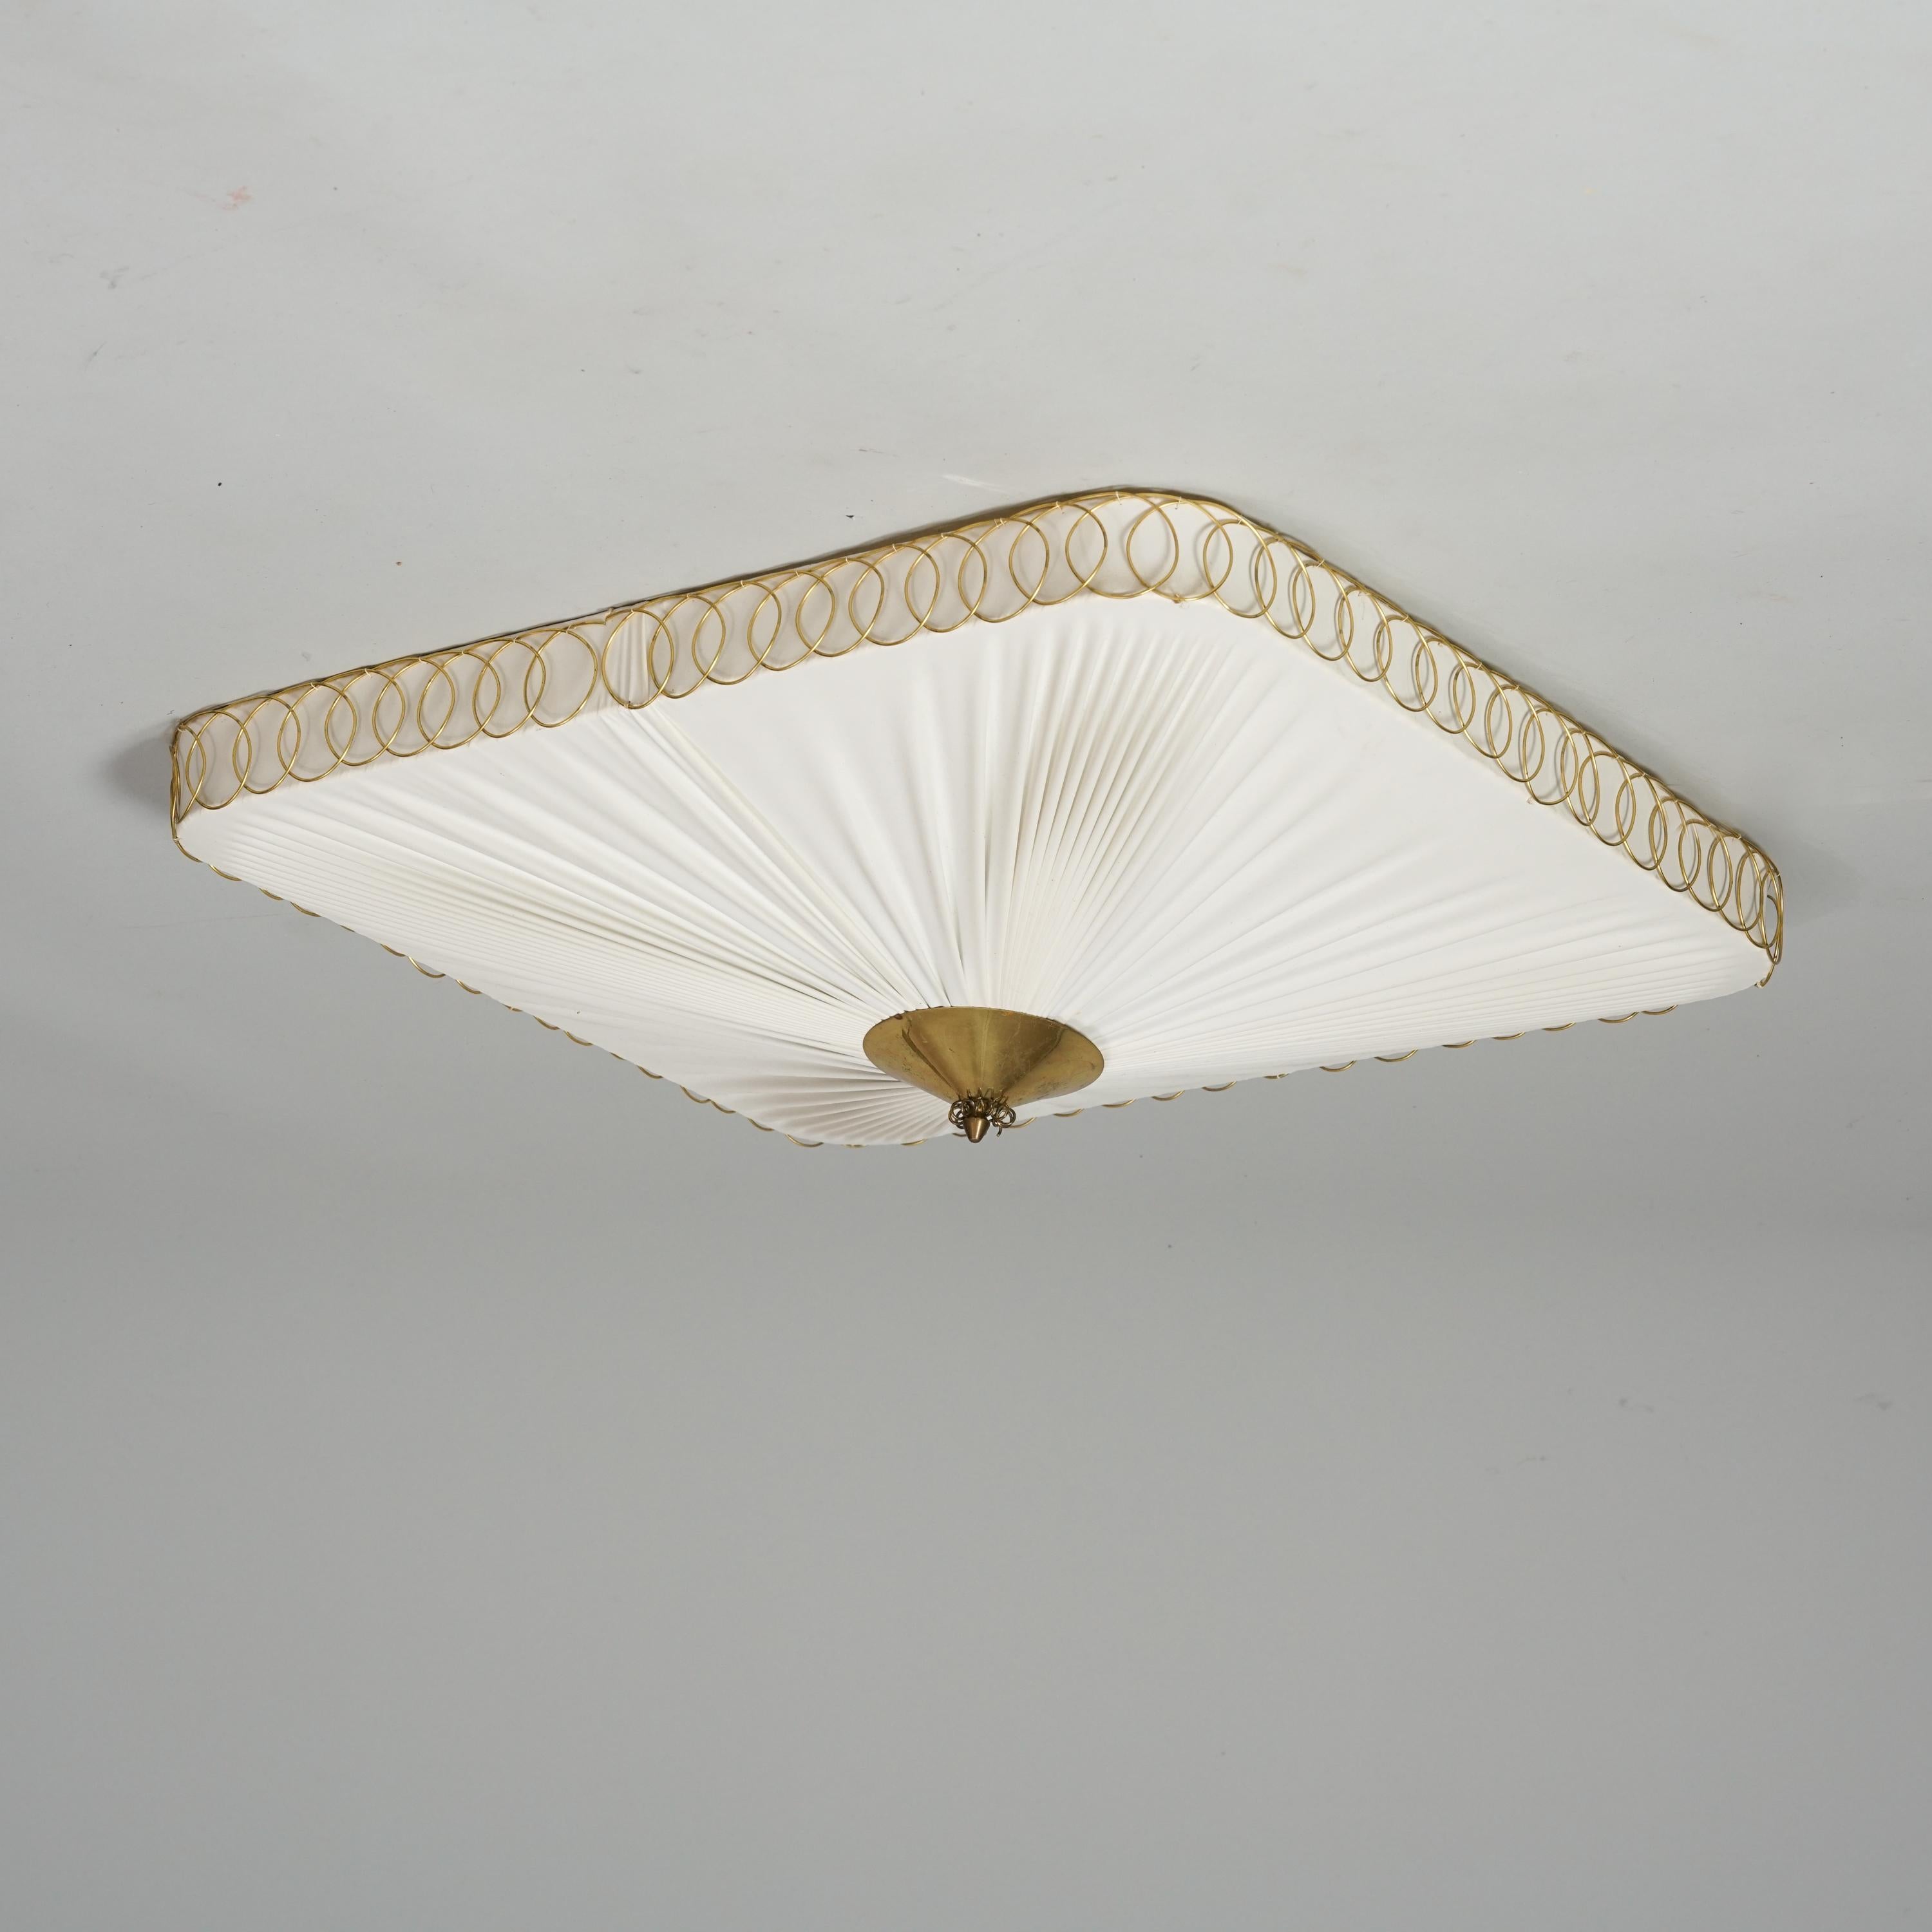 Scandinavian Modern flush mount model 11025 by Idman Oy Finland, from the 1950s. Fabric shade, brass details. Good vintage condition, patina and wear consistent with age and use. Classic Idman design.